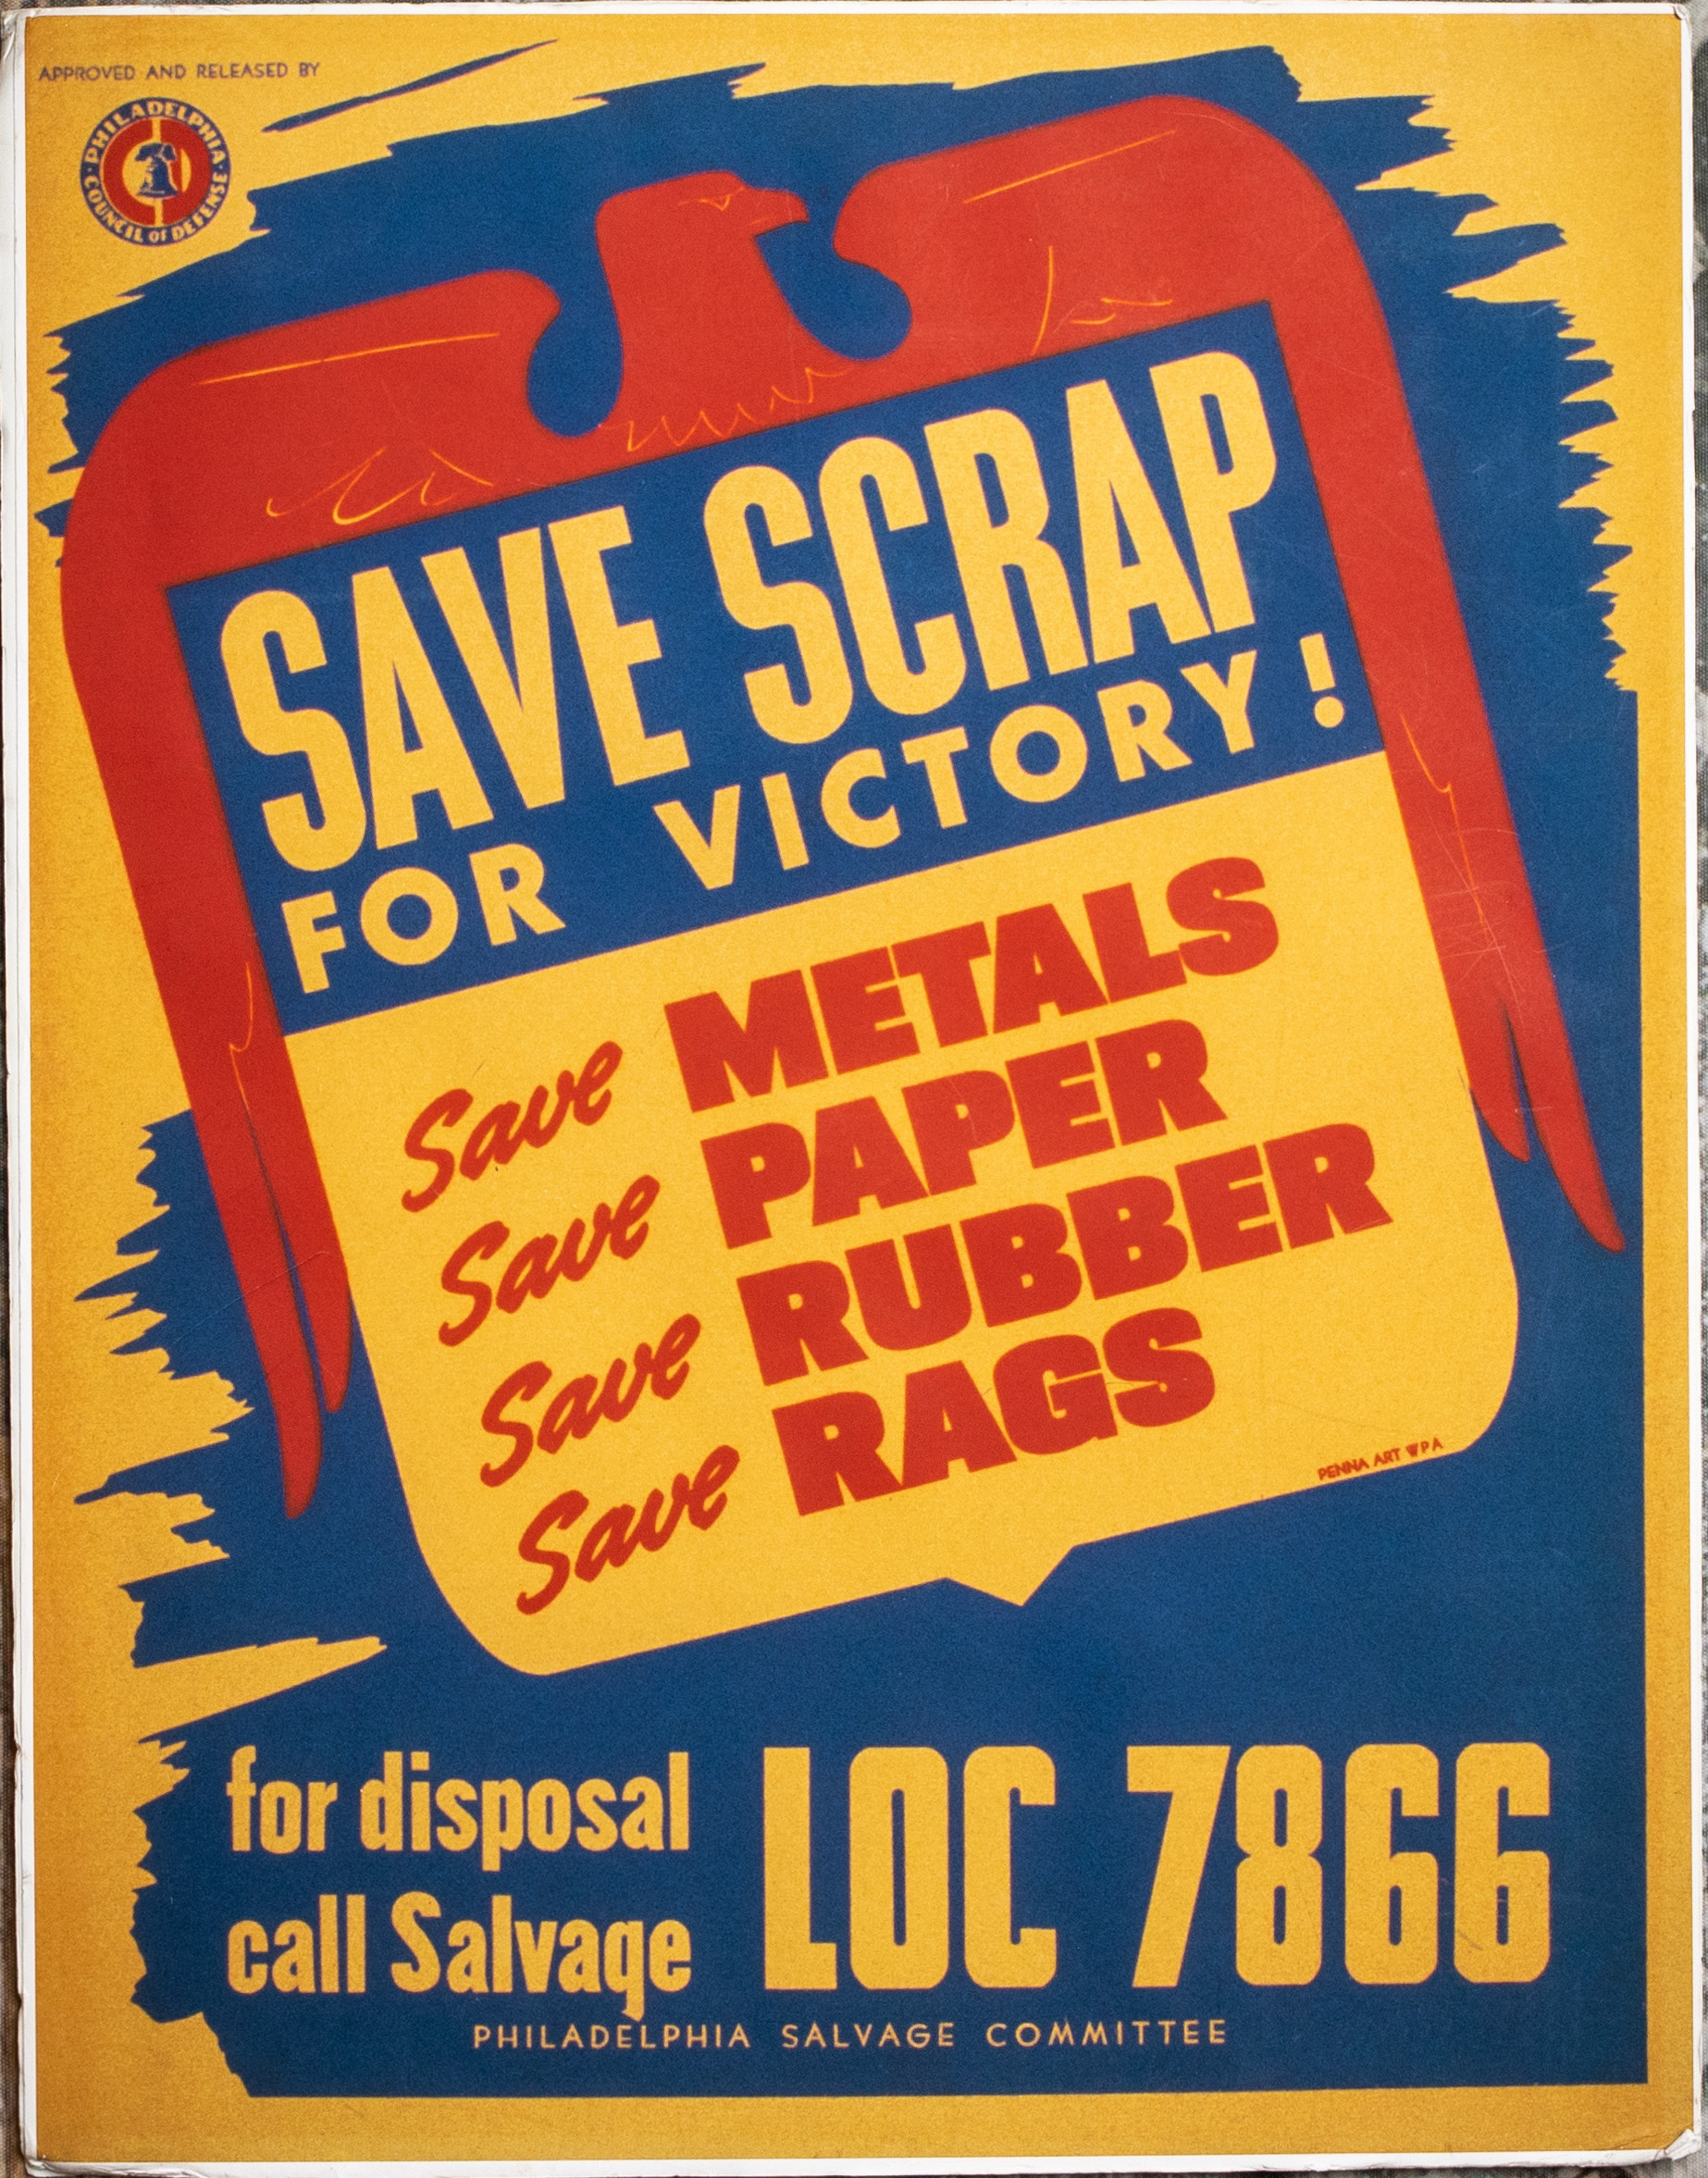 Save Scrap for Victory